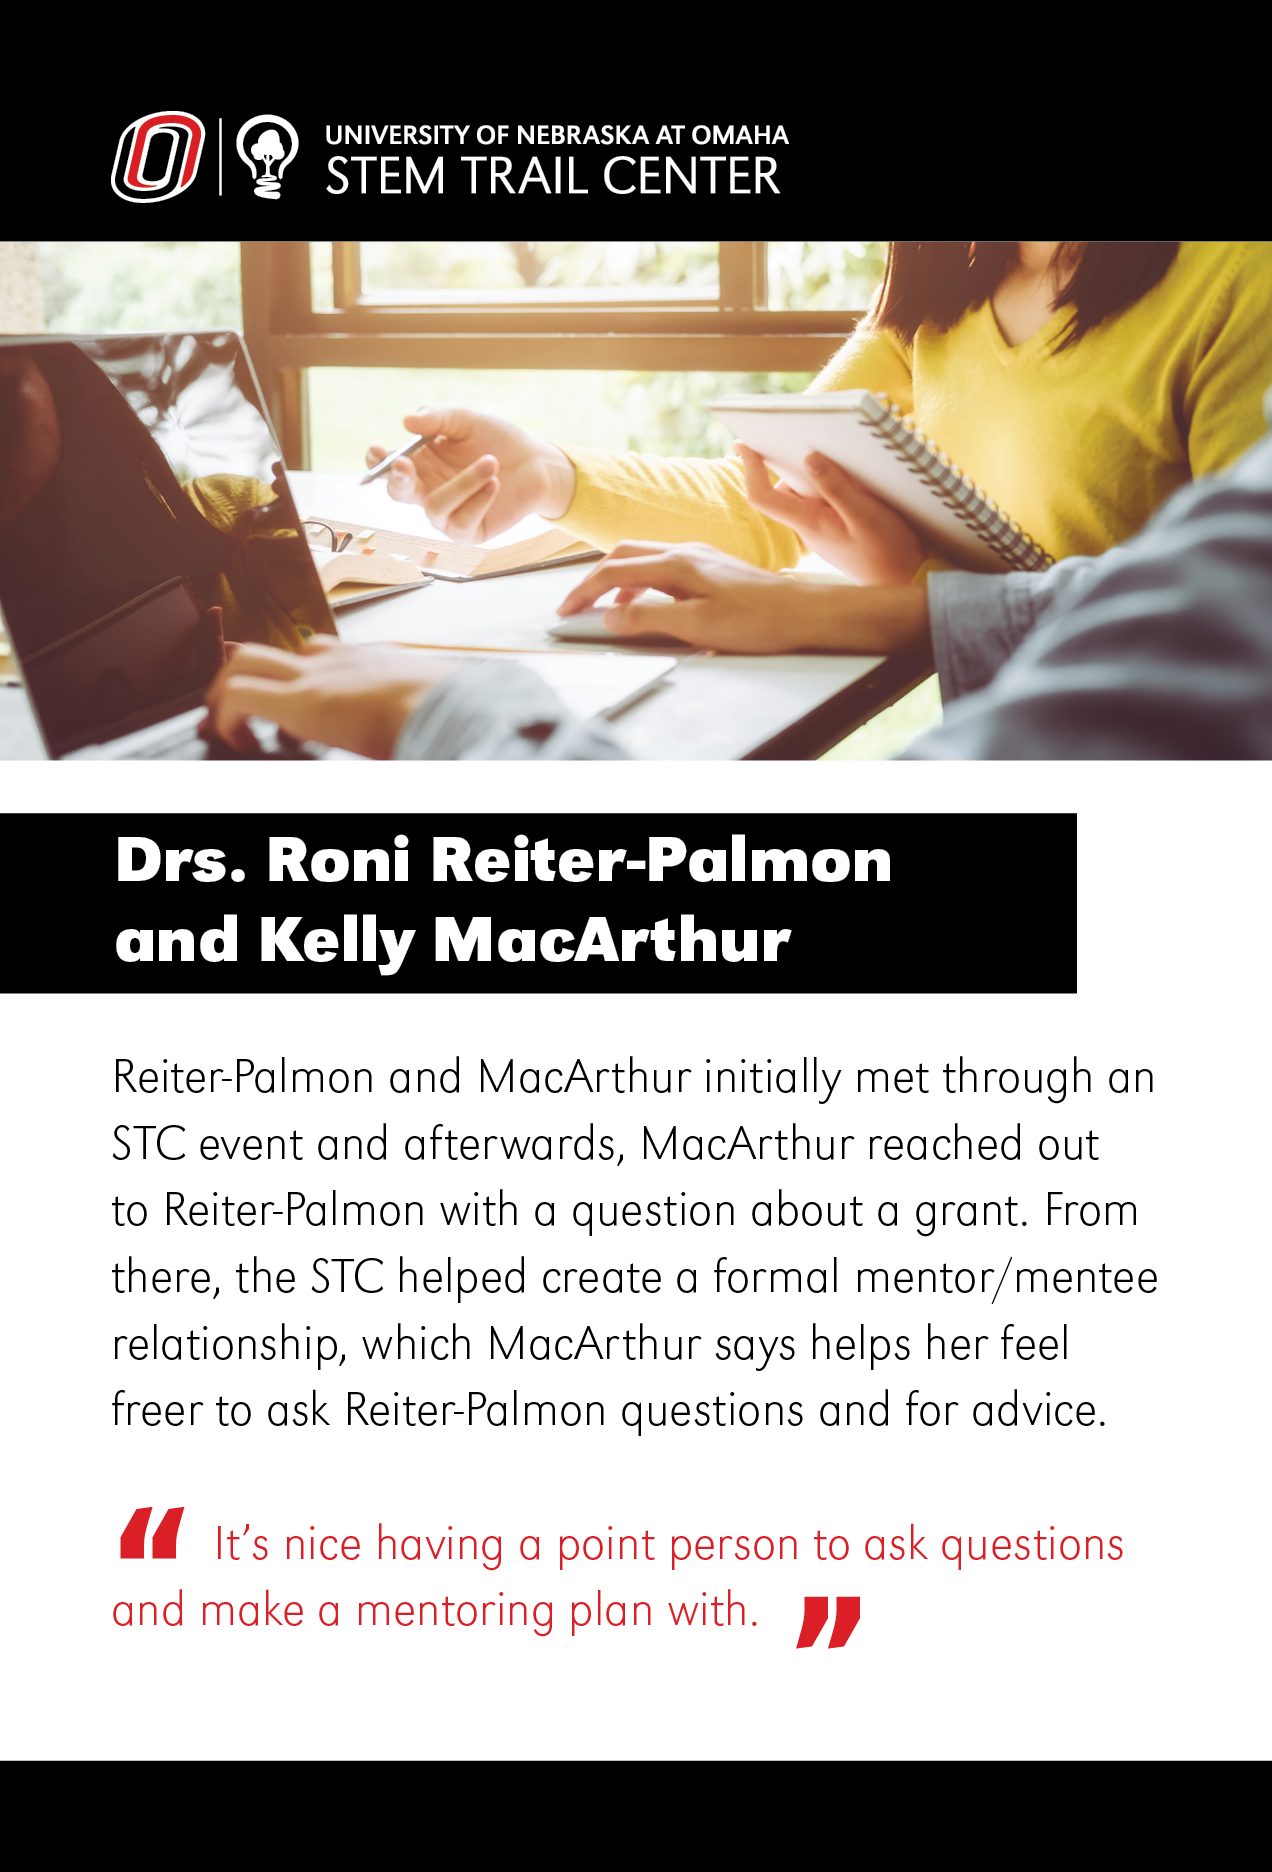 A generic image of 2 people at a computer. A quote from Drs. Roni Reiter-Palmon and Kelly Macarthur